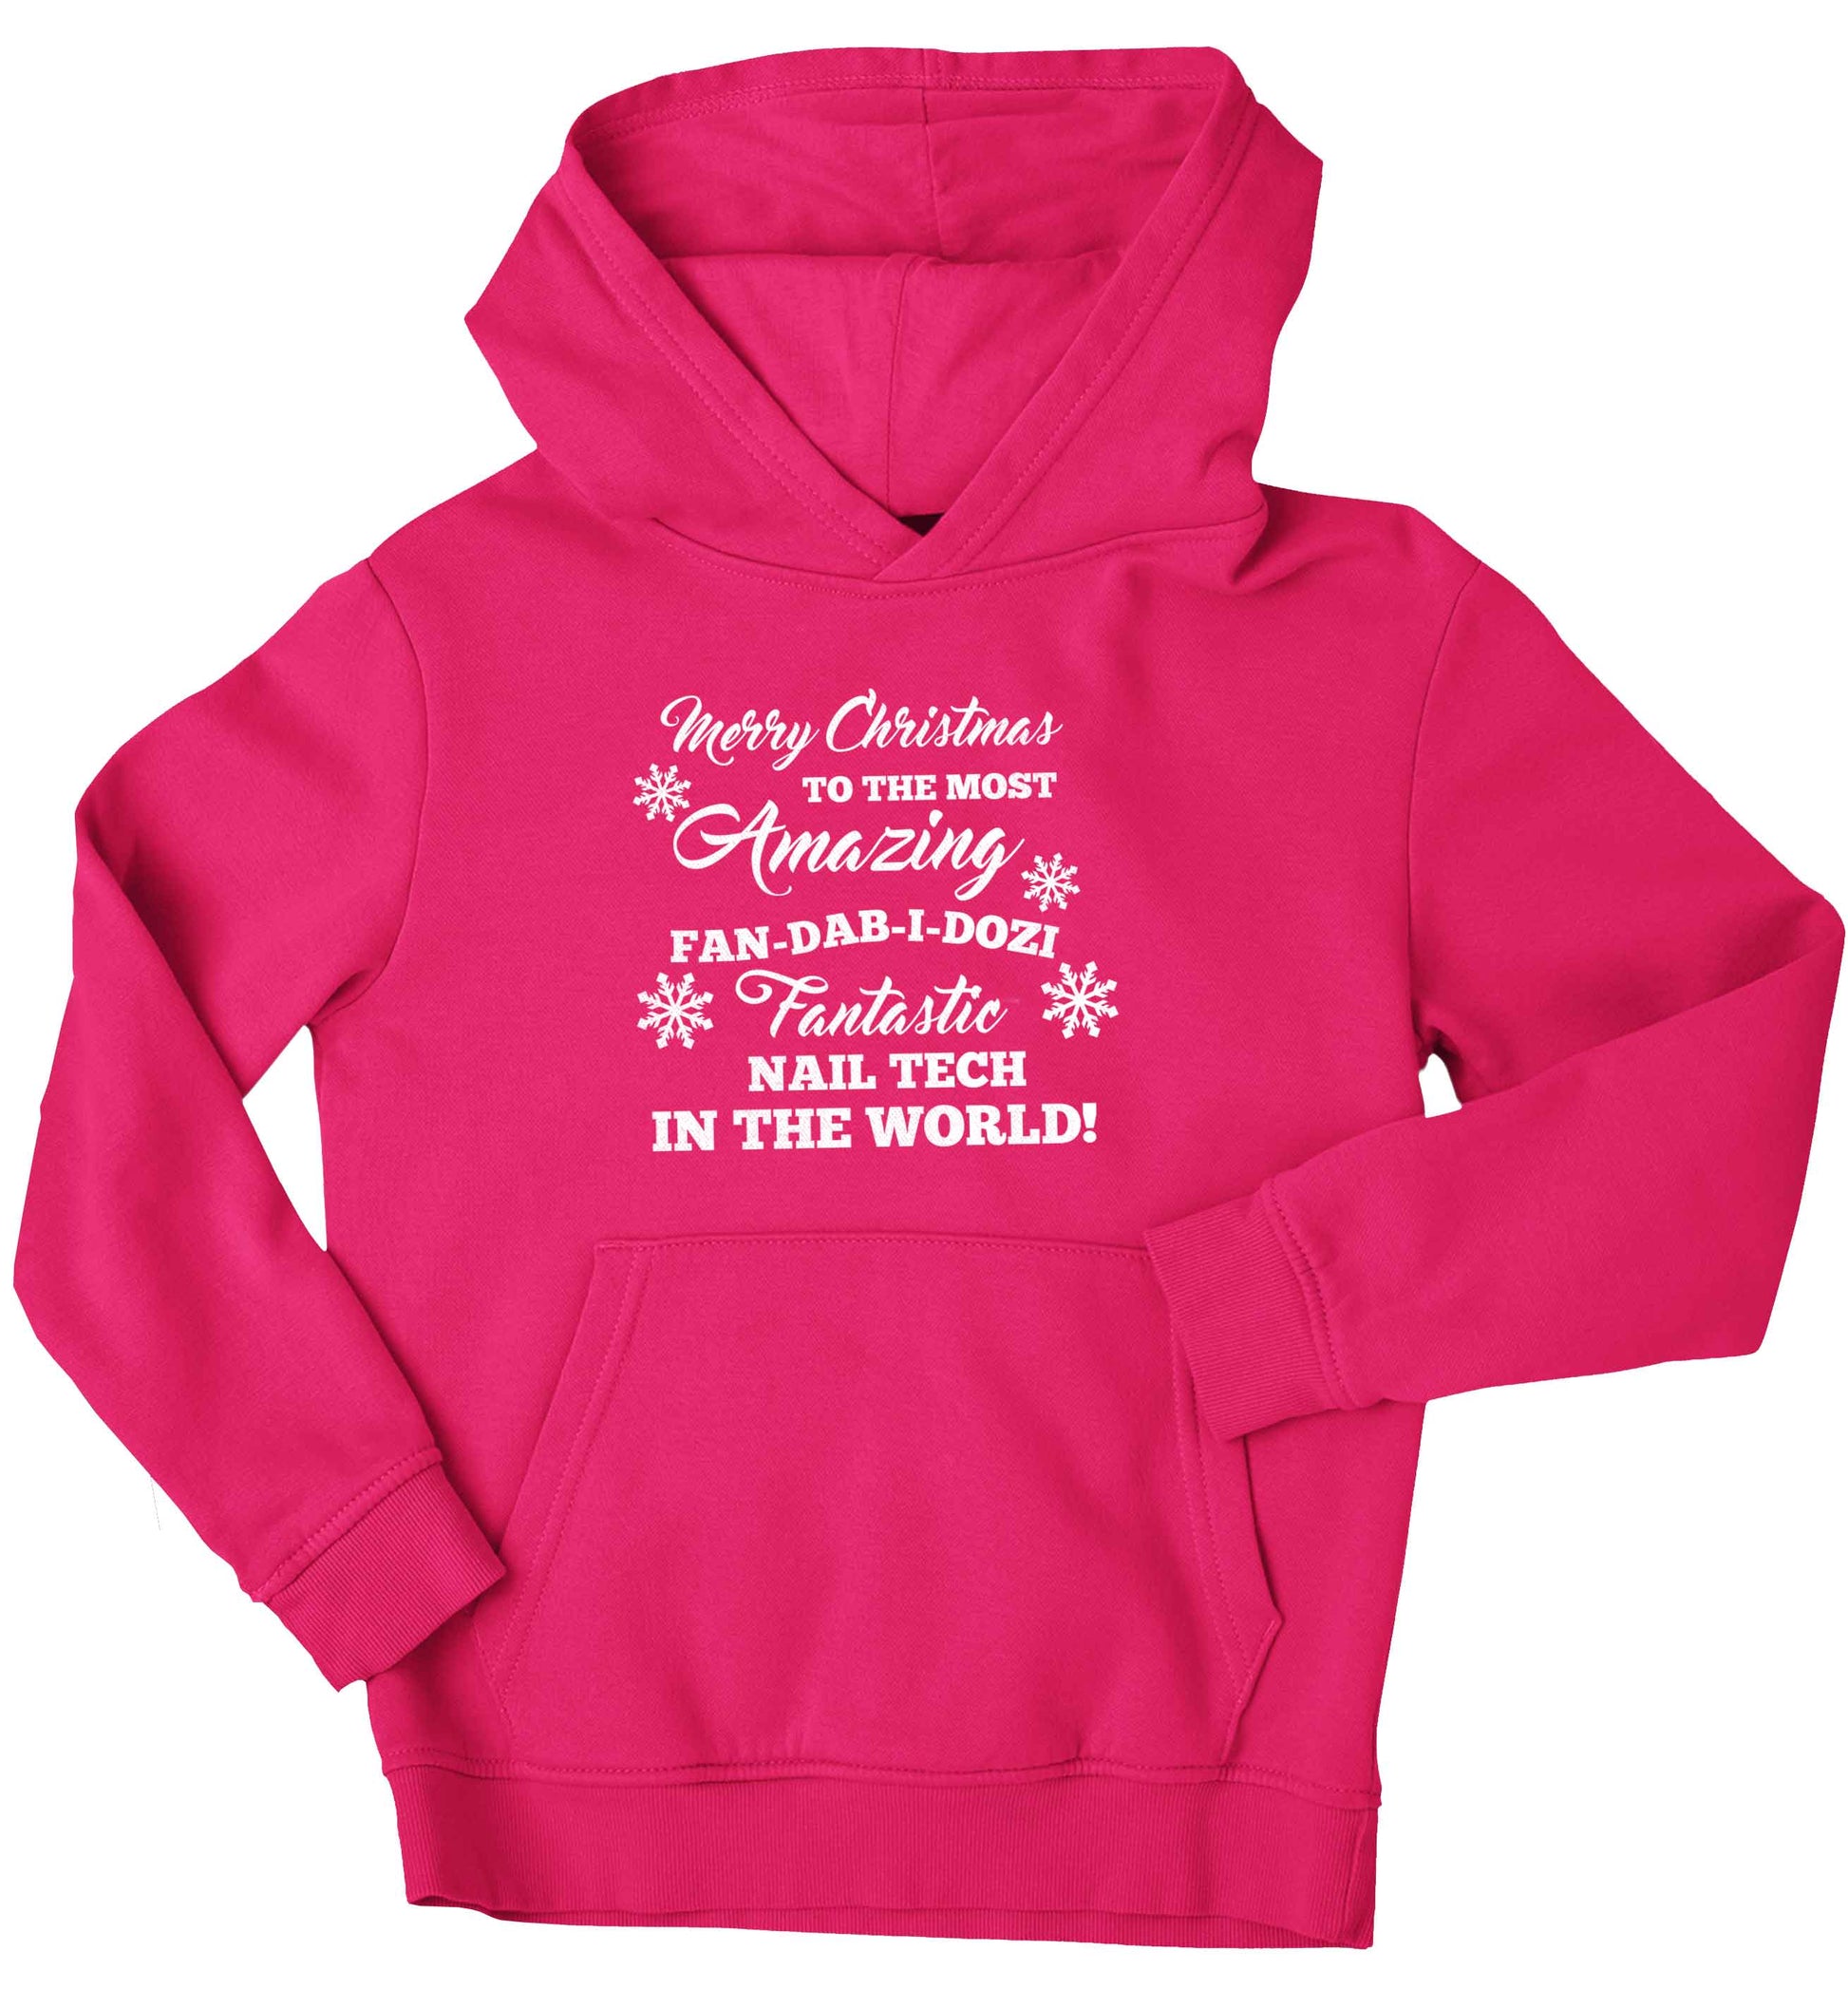 Merry Christmas to the most amazing fan-dab-i-dozi fantasic nail technician in the world children's pink hoodie 12-13 Years